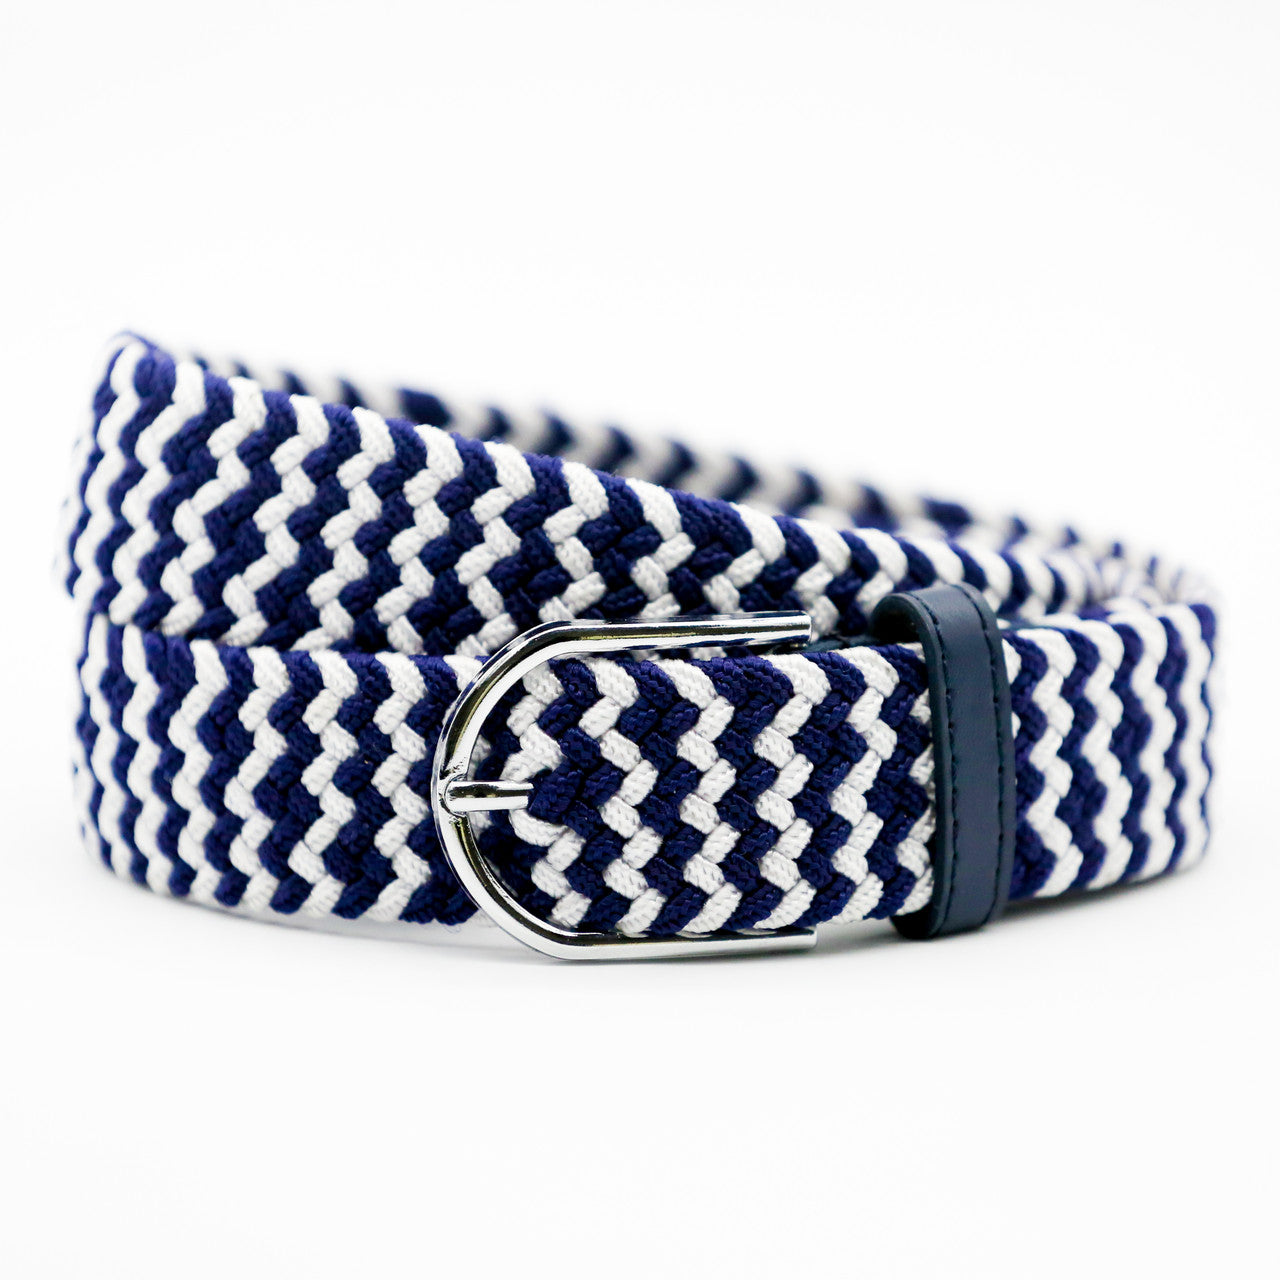 Belt - Navy and White Zig Zag with tan ends